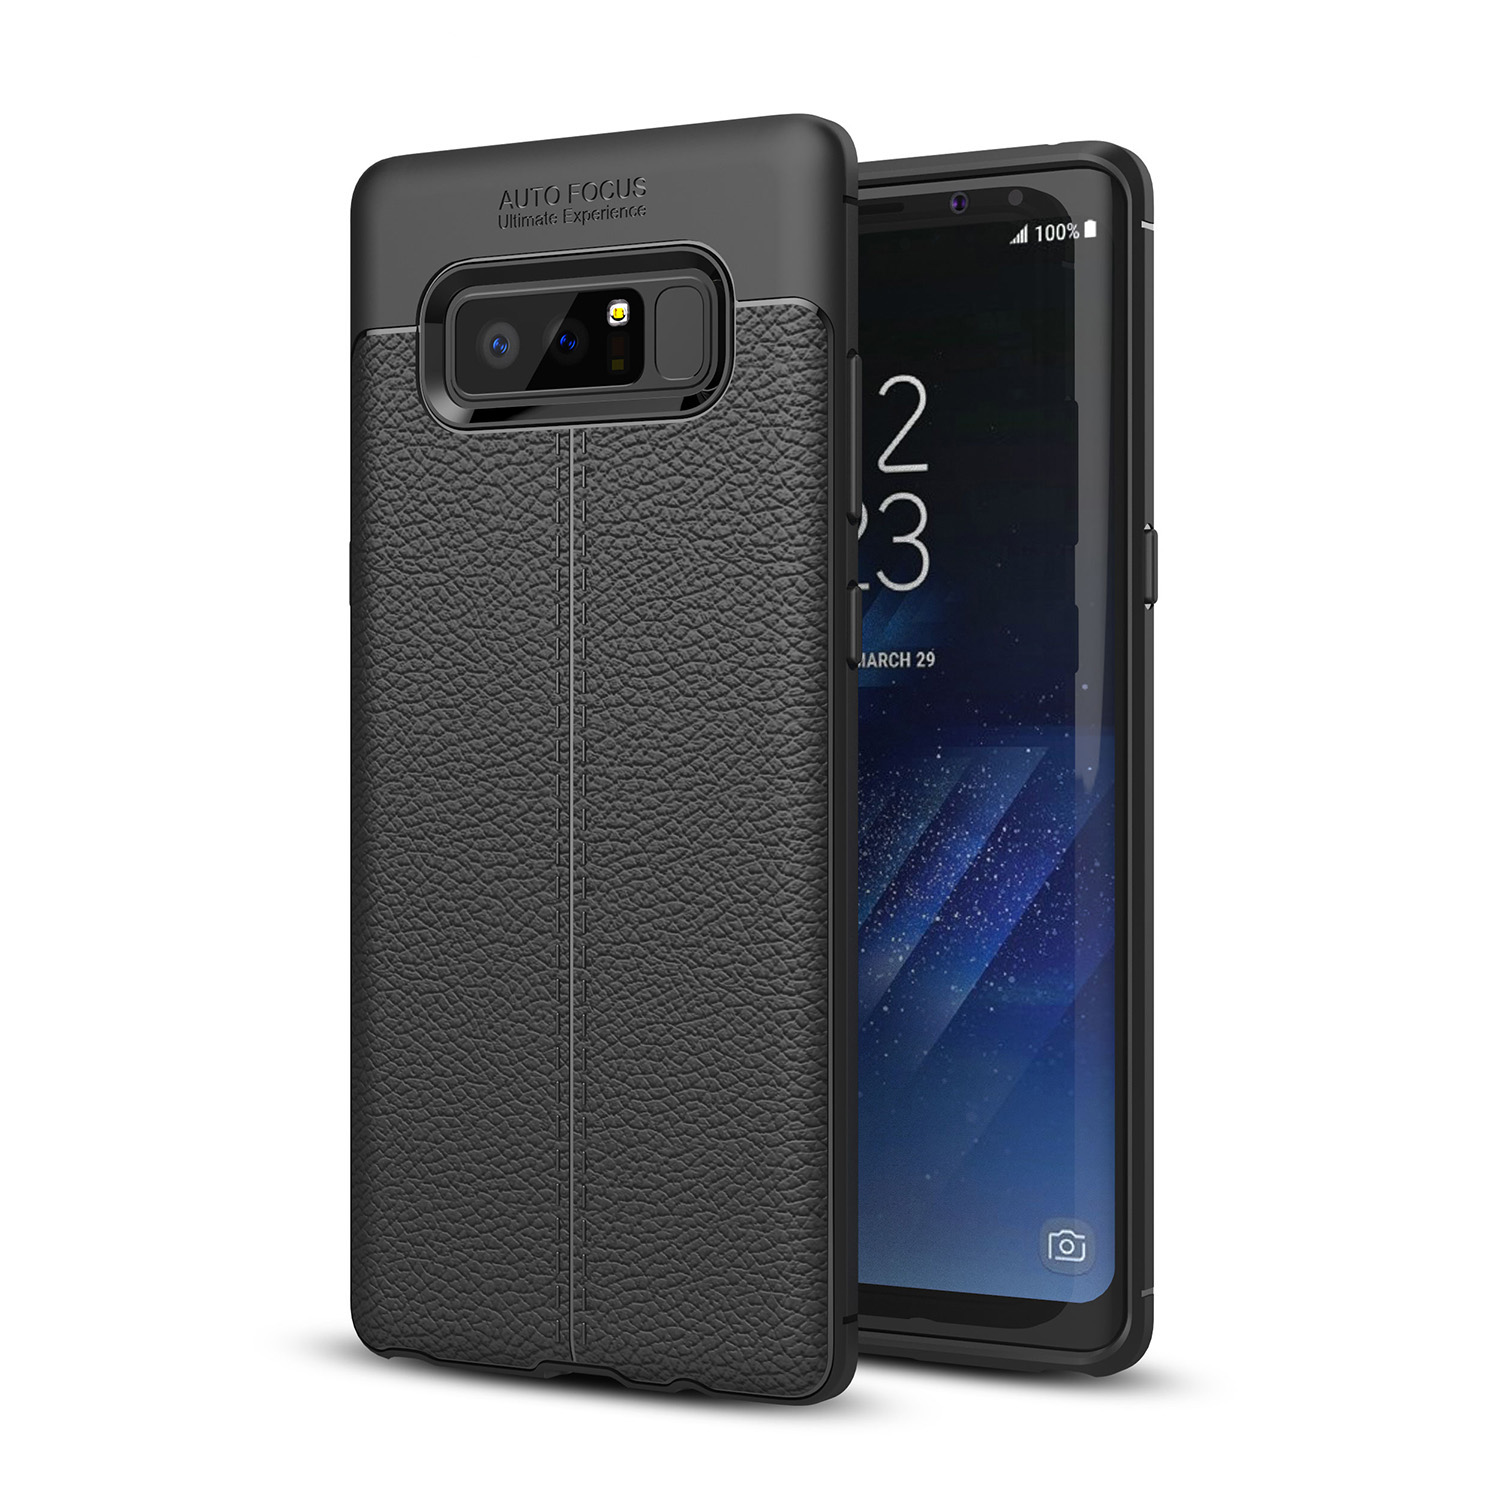 

Bakeey™ Anti Fingerprint Soft TPU Litchi Leather Case Cover for Samsung Galaxy Note 8/S8/S8 Plus